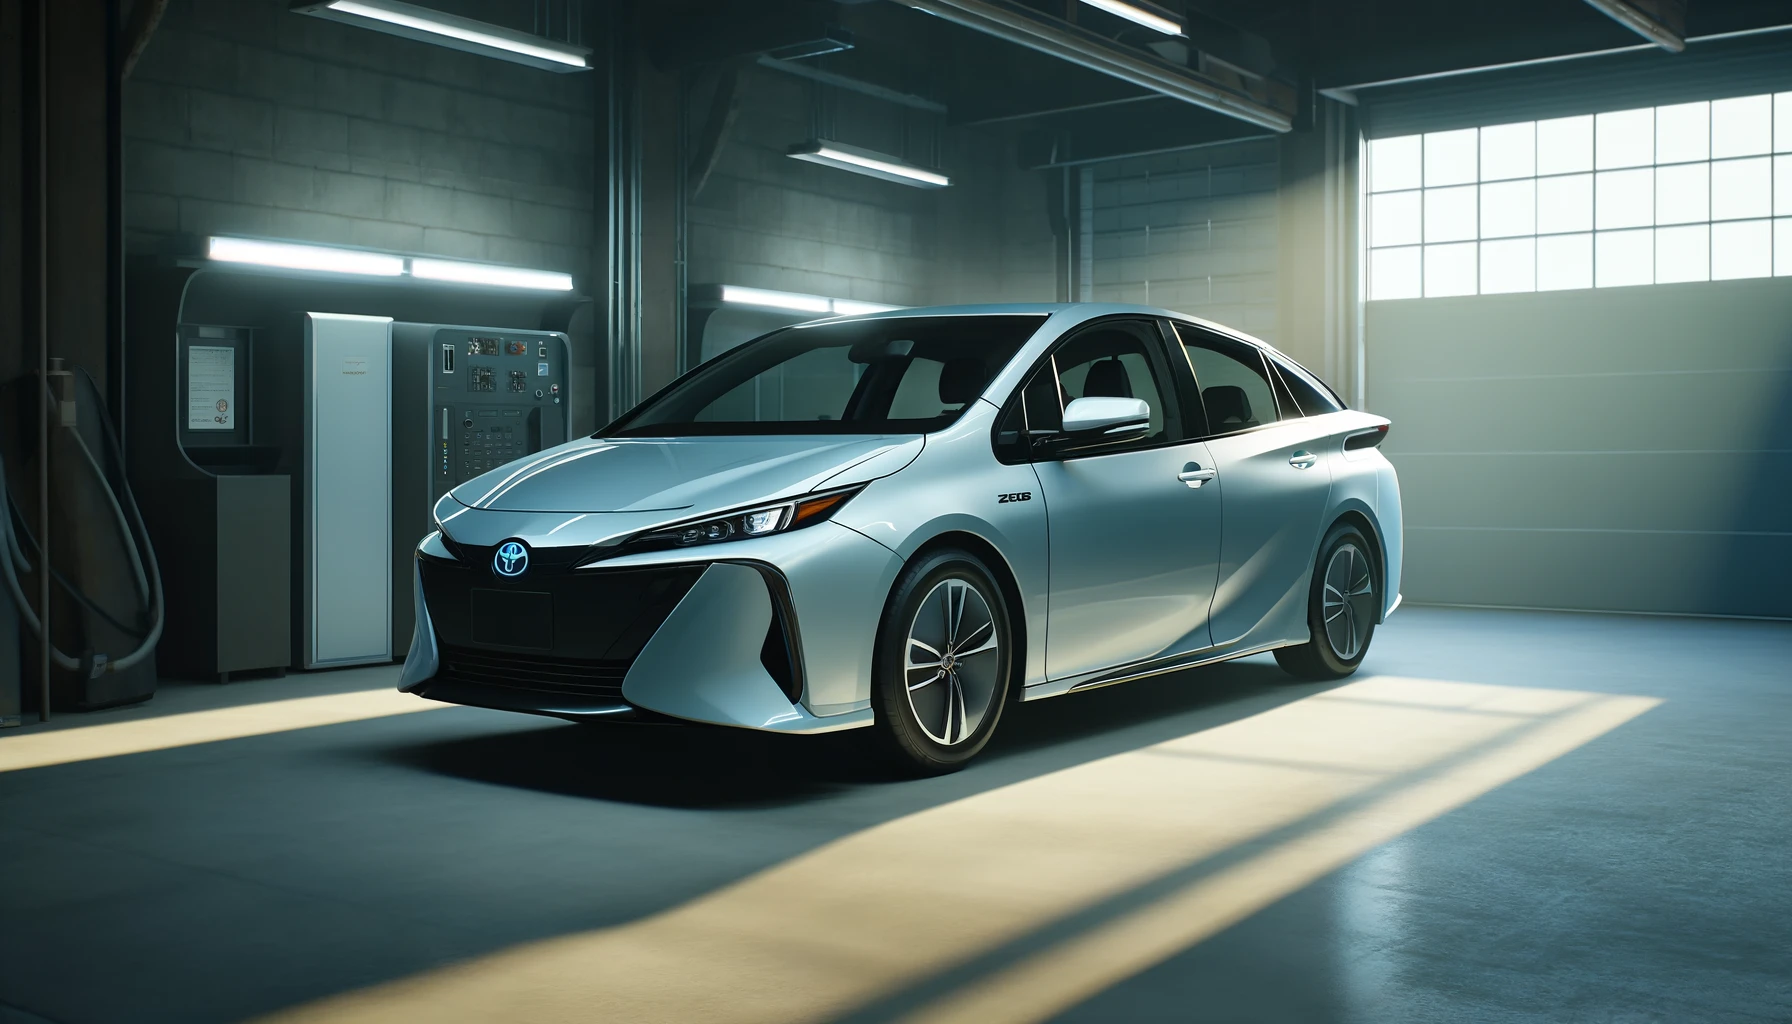 2023 Toyota Prius in a garage, showcasing its sleek design and electronic door handles, highlighting modern automotive technology for an article on the vehicle's recall.